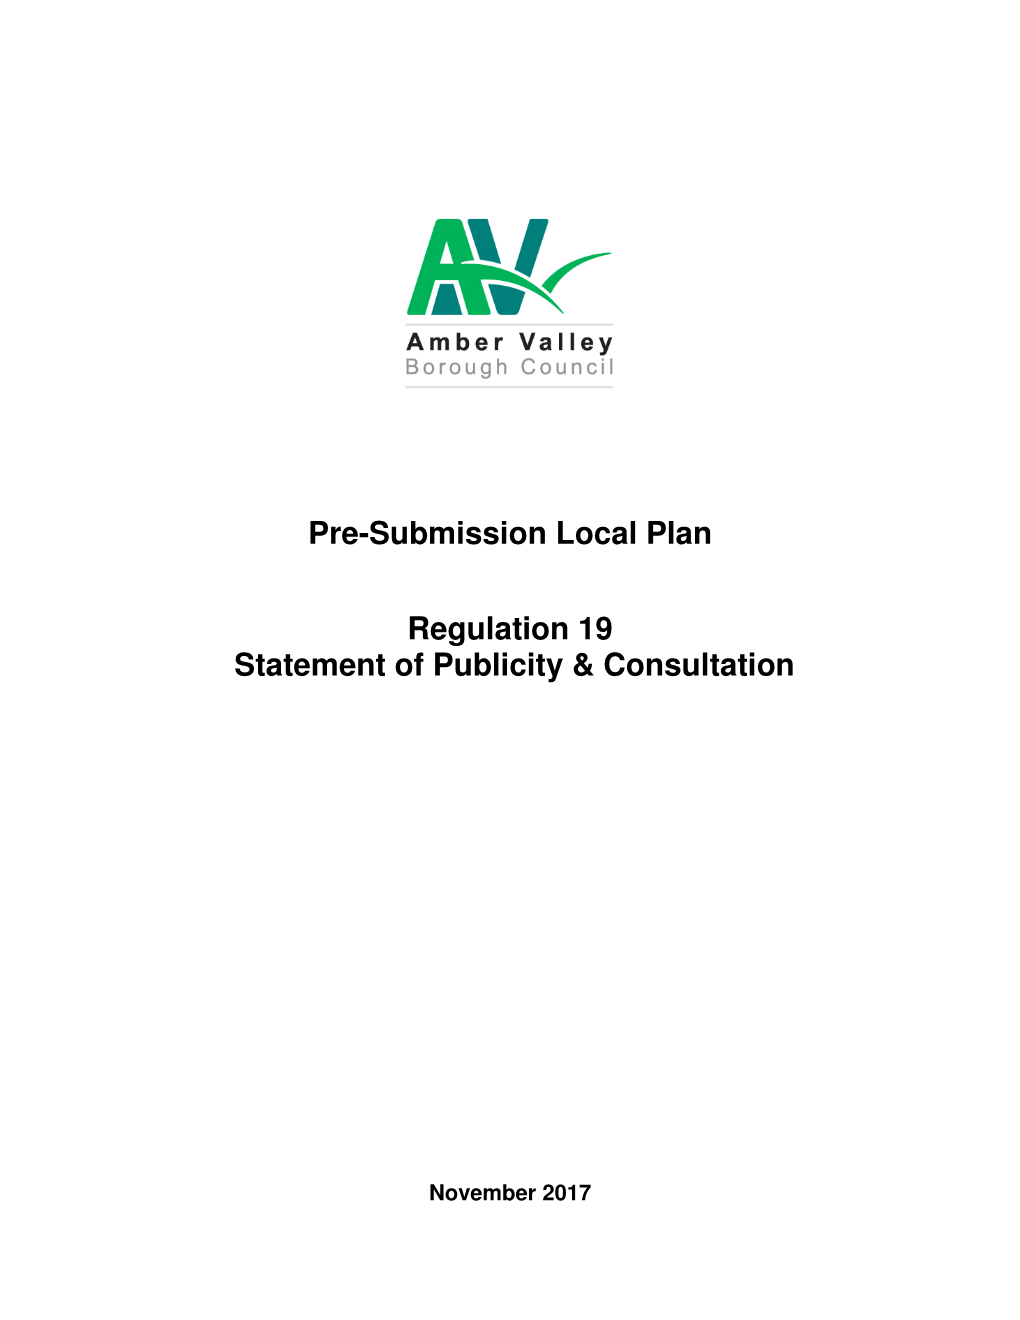 Regulation 19 Statement of Publicity and Consultation